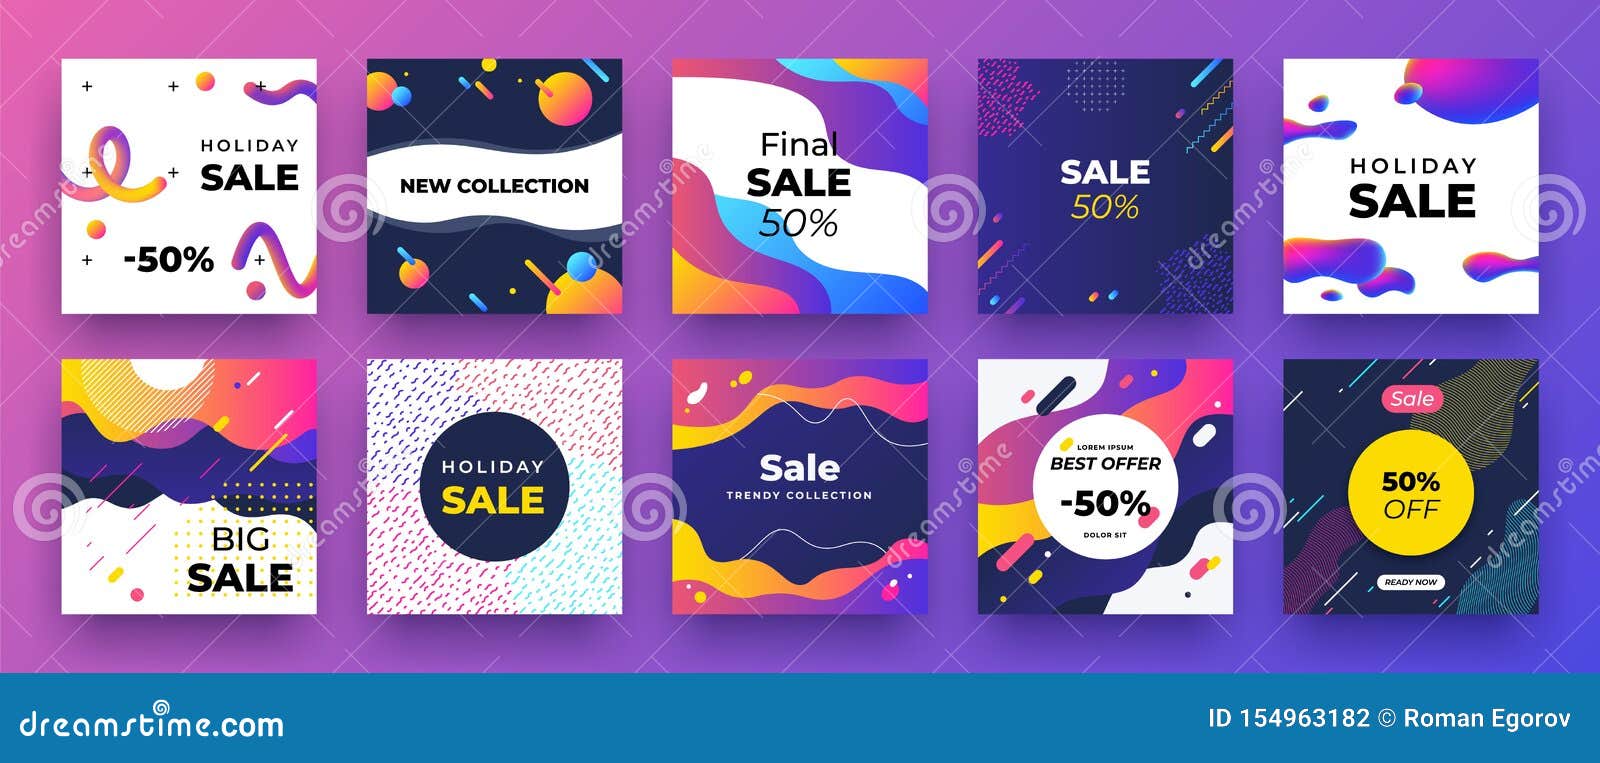 Download Square Social Media Banner Fashion Sale Design Promotion Graphic Layout Template Vector Trendy Discount Ad Mockup Stock Vector Illustration Of Mockup Price 154963182